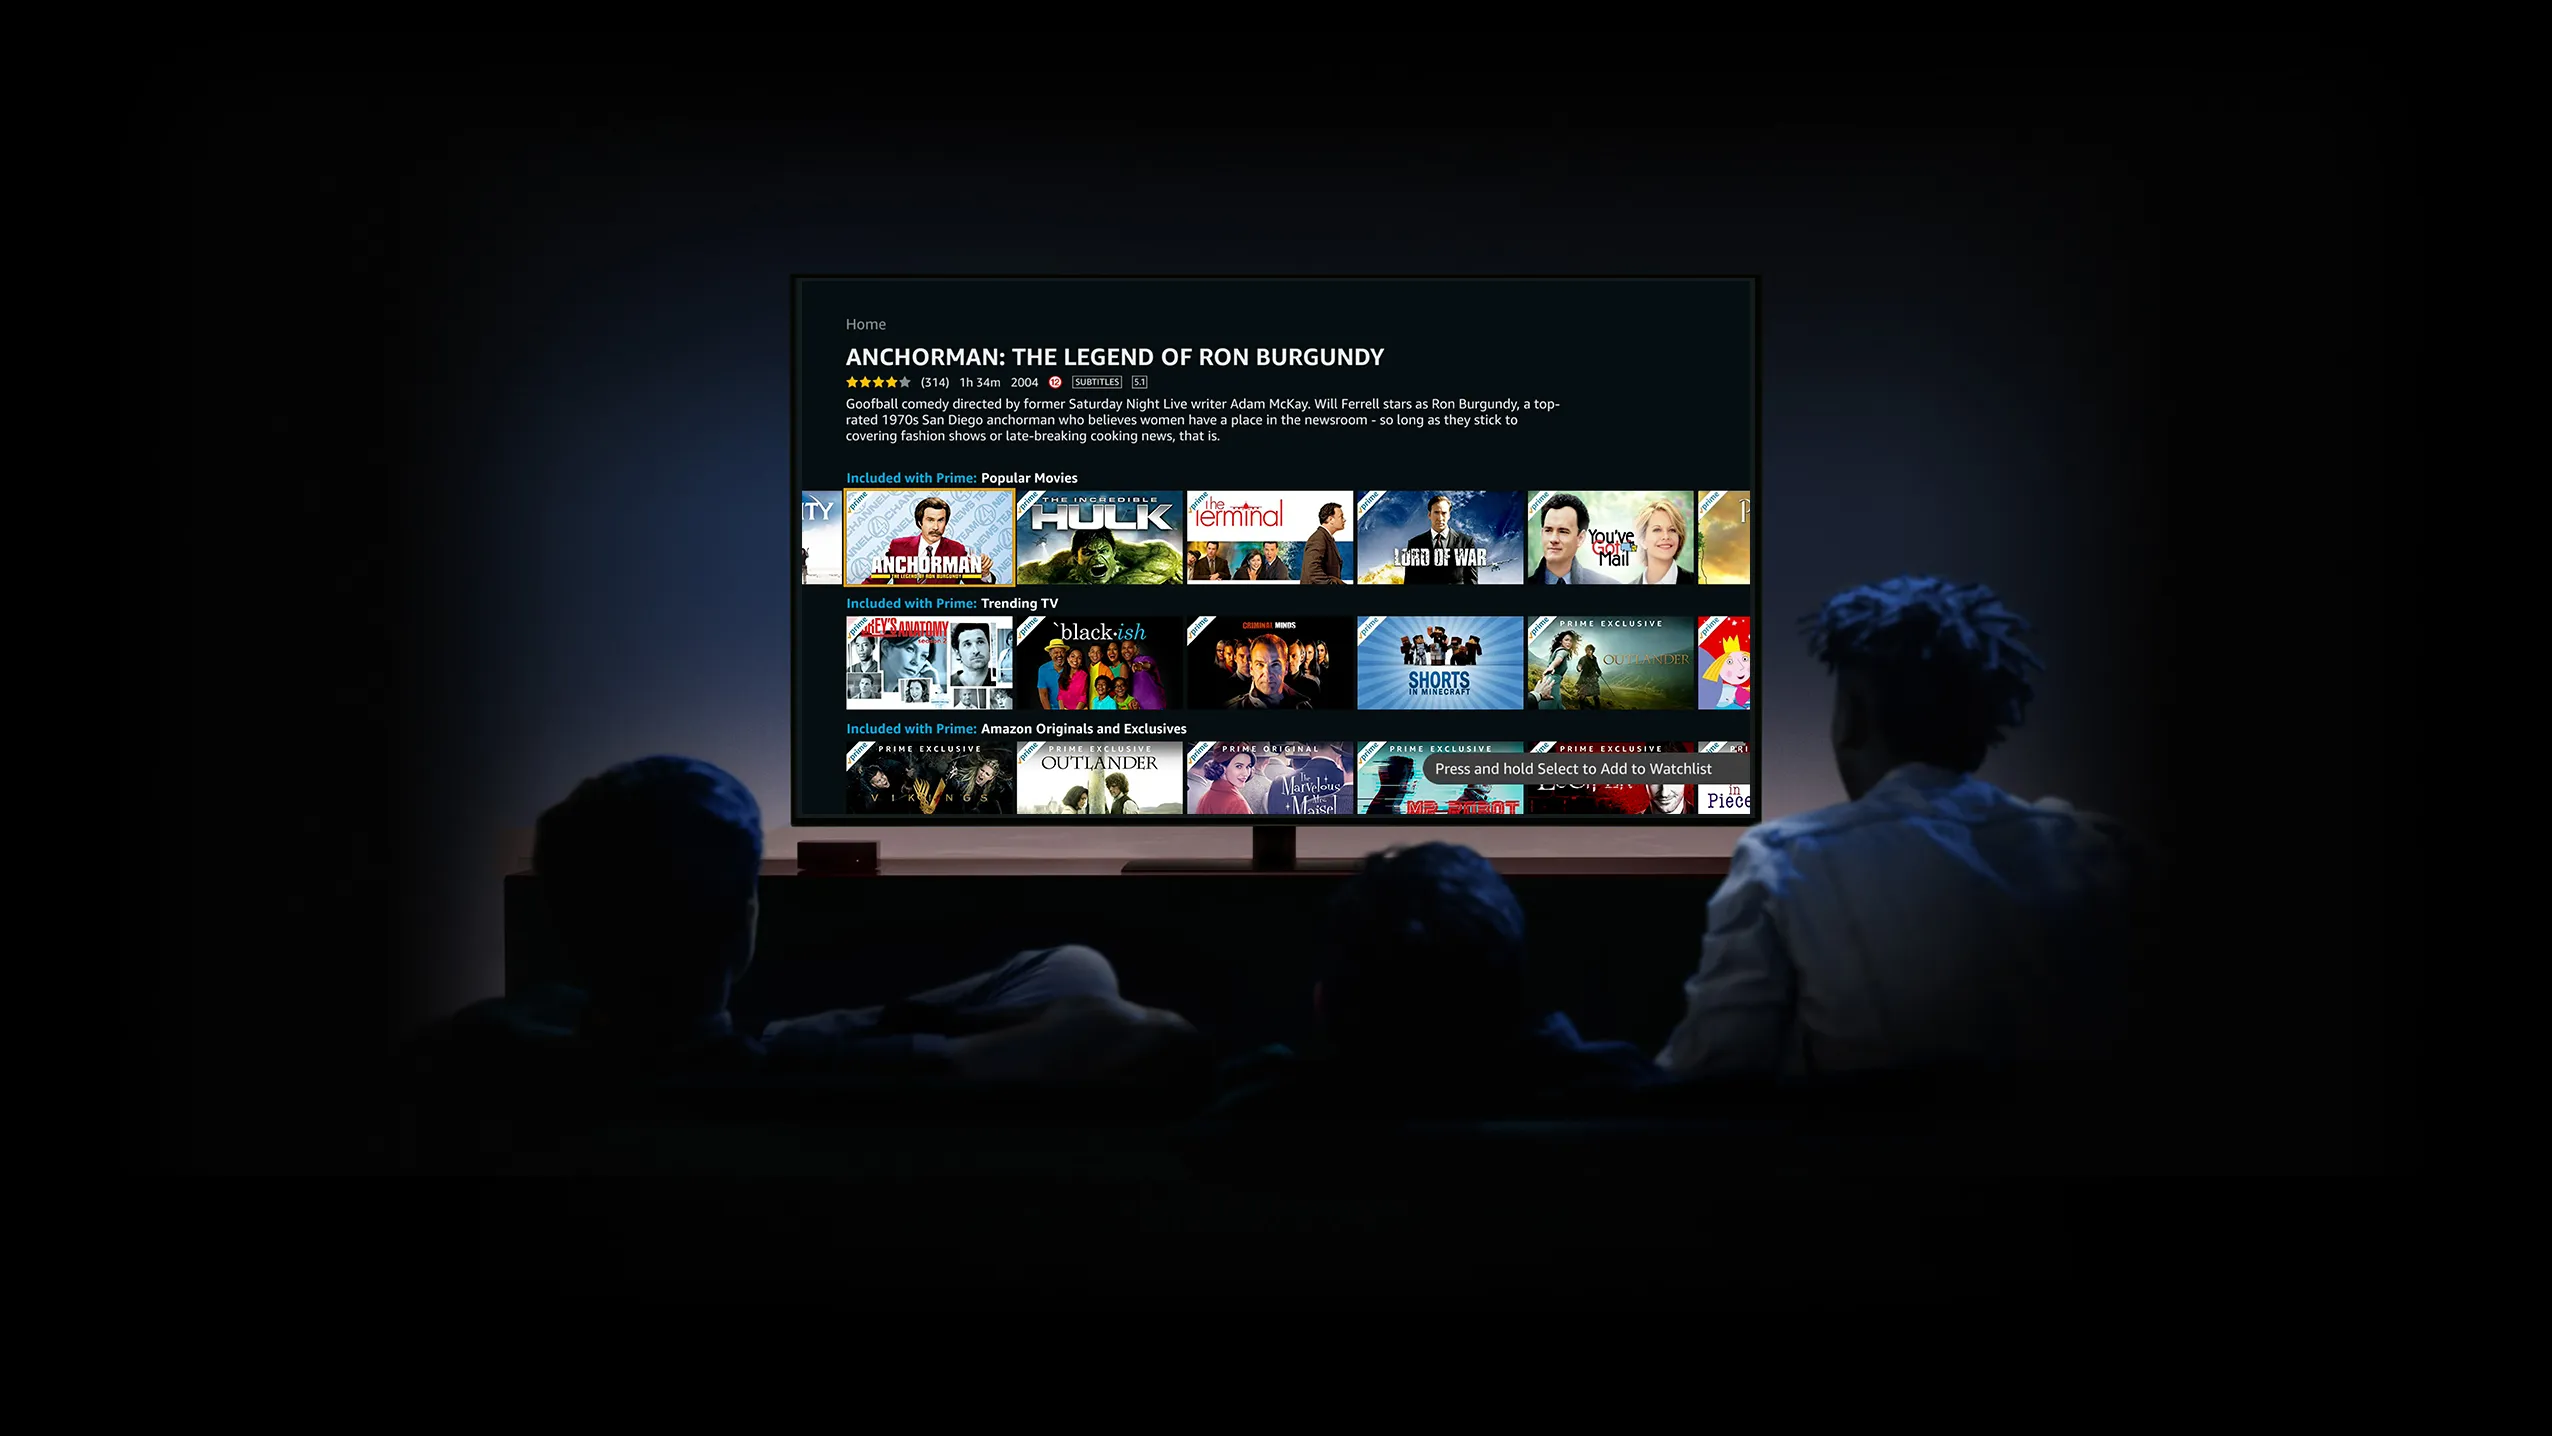 How To Watch Itunes On Smart TV